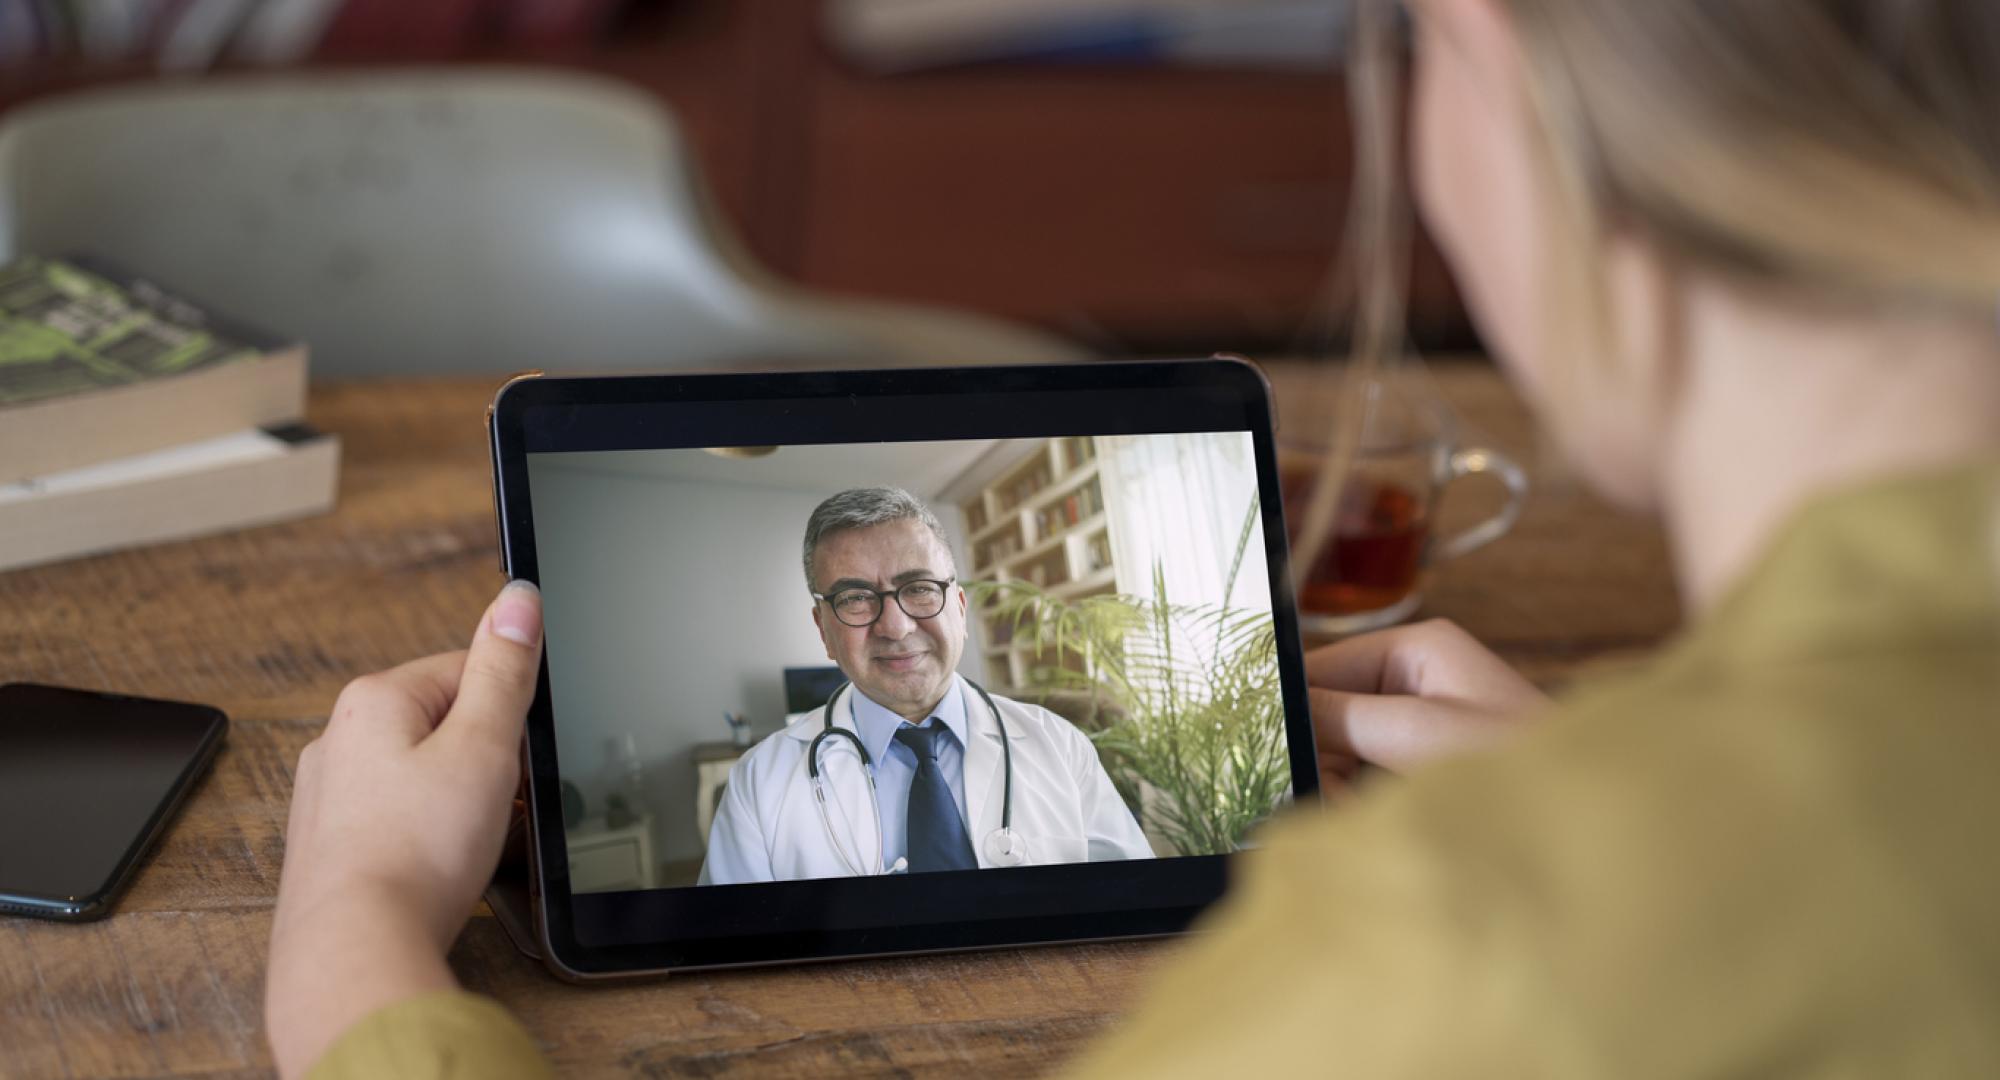 Doctor and patient talking on video call using digital tablet